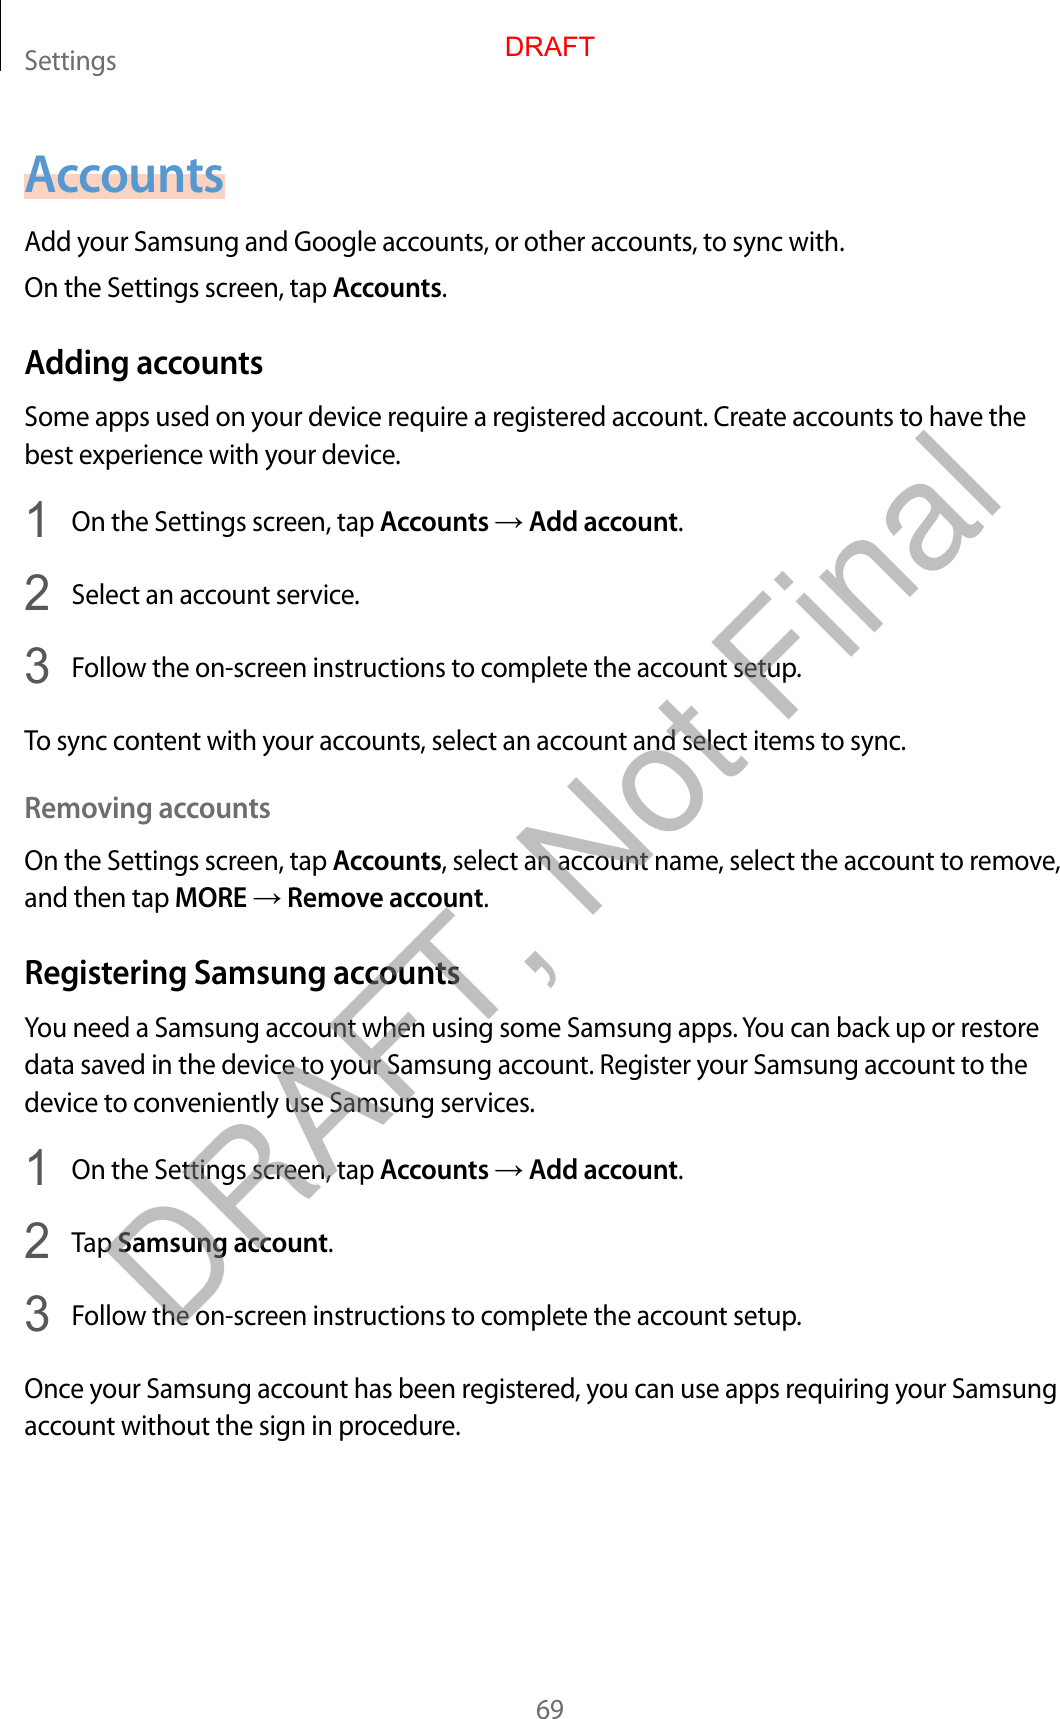 Settings69AccountsAdd your Samsung and Google accounts, or other accounts, to sync with.On the Settings screen, tap Accounts.Adding accountsSome apps used on your device require a registered account. Create accounts to have the best experience with your device.1  On the Settings screen, tap Accounts → Add account.2  Select an account service.3  Follow the on-screen instructions to complete the account setup.To sync content with your accounts, select an account and select items to sync.Removing accountsOn the Settings screen, tap Accounts, select an account name, select the account to remove, and then tap MORE → Remove account.Registering Samsung accountsYou need a Samsung account when using some Samsung apps. You can back up or restore data saved in the device to your Samsung account. Register your Samsung account to the device to conveniently use Samsung services.1  On the Settings screen, tap Accounts → Add account.2  Tap Samsung account.3  Follow the on-screen instructions to complete the account setup.Once your Samsung account has been registered, you can use apps requiring your Samsung account without the sign in procedure.DRAFTDRAFT, Not Final